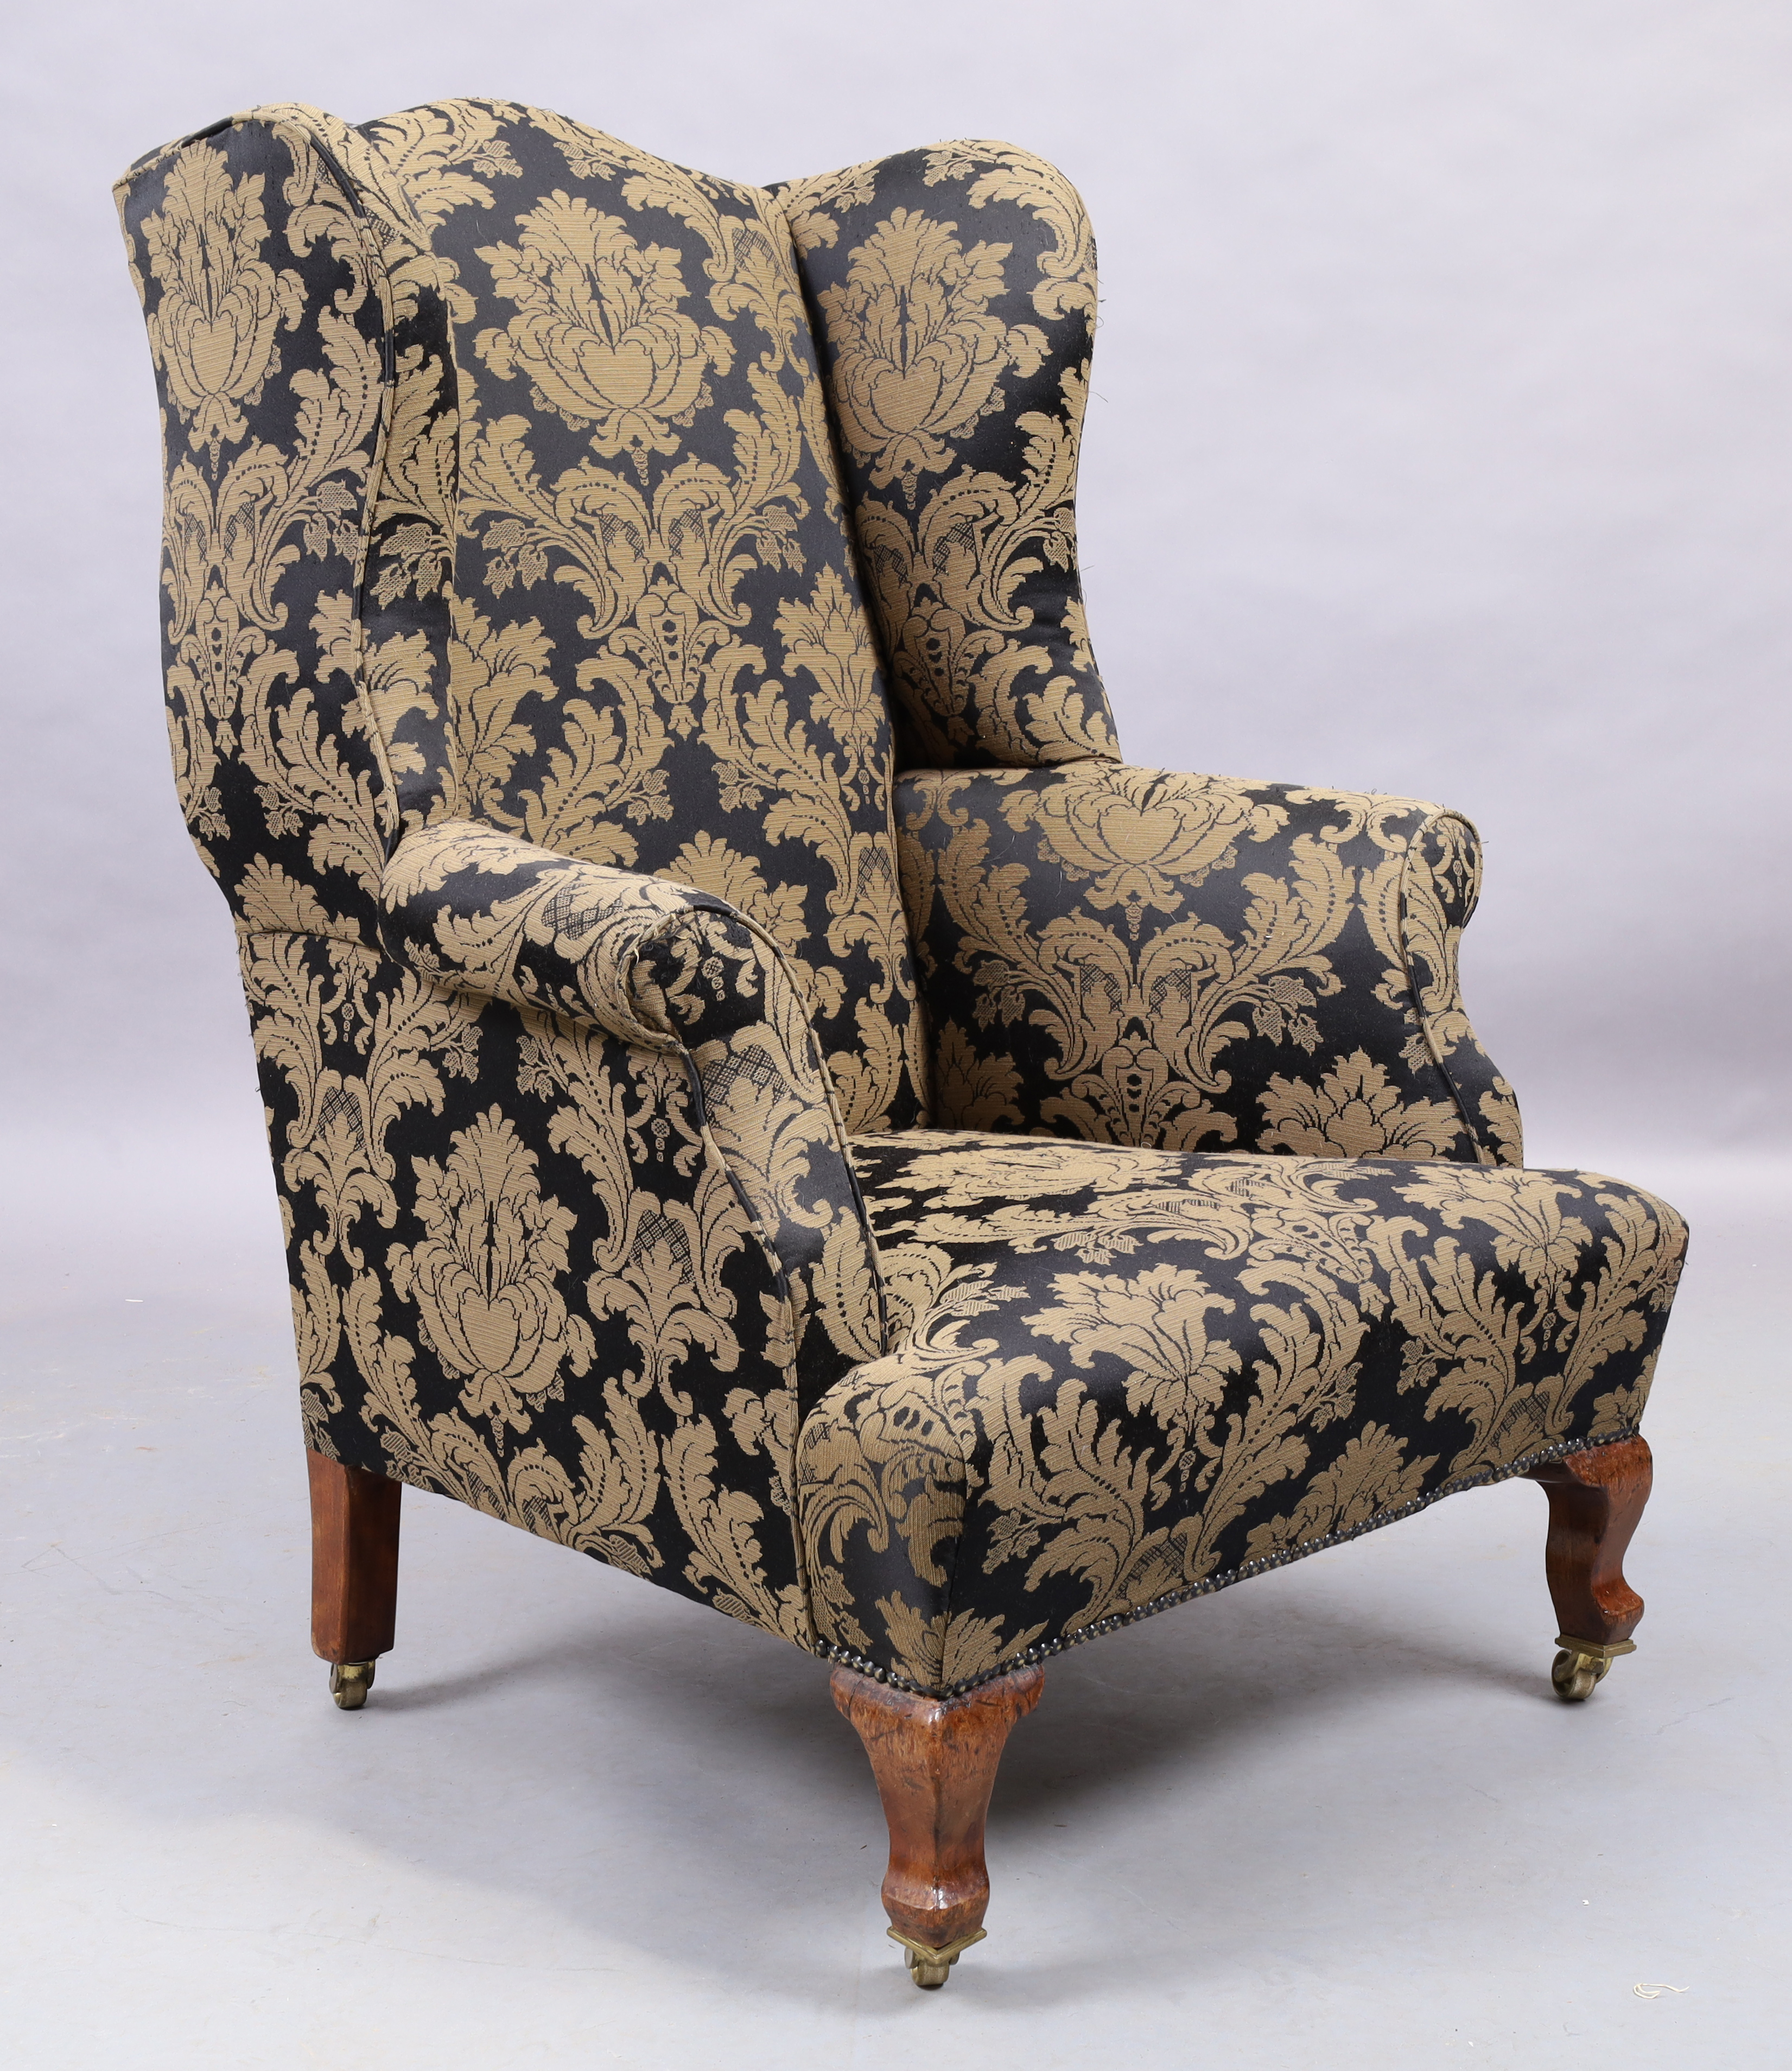 An English mahogany wingback armchair, George III style, last quarter 19th century, with black an...